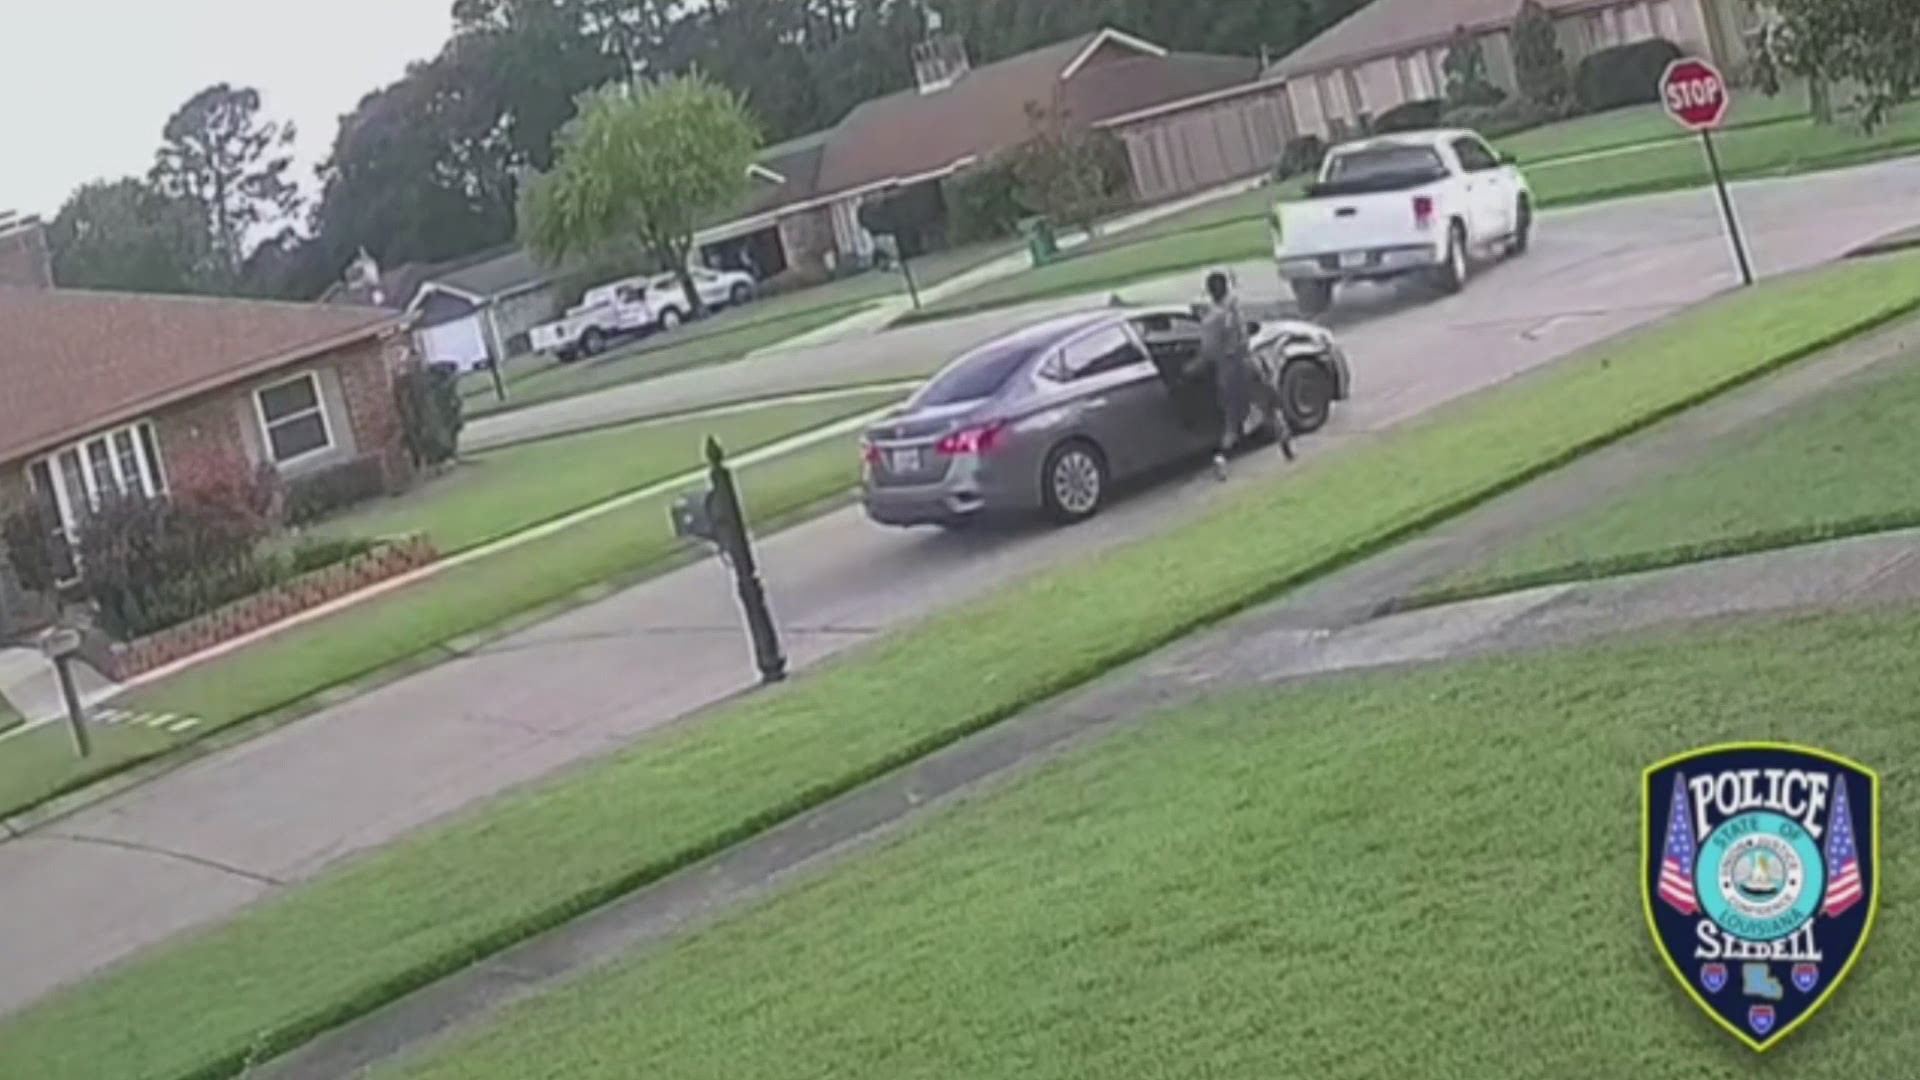 Road rage in Slidell turns violent as the passenger of one car got out and started shooting at the truck behind.